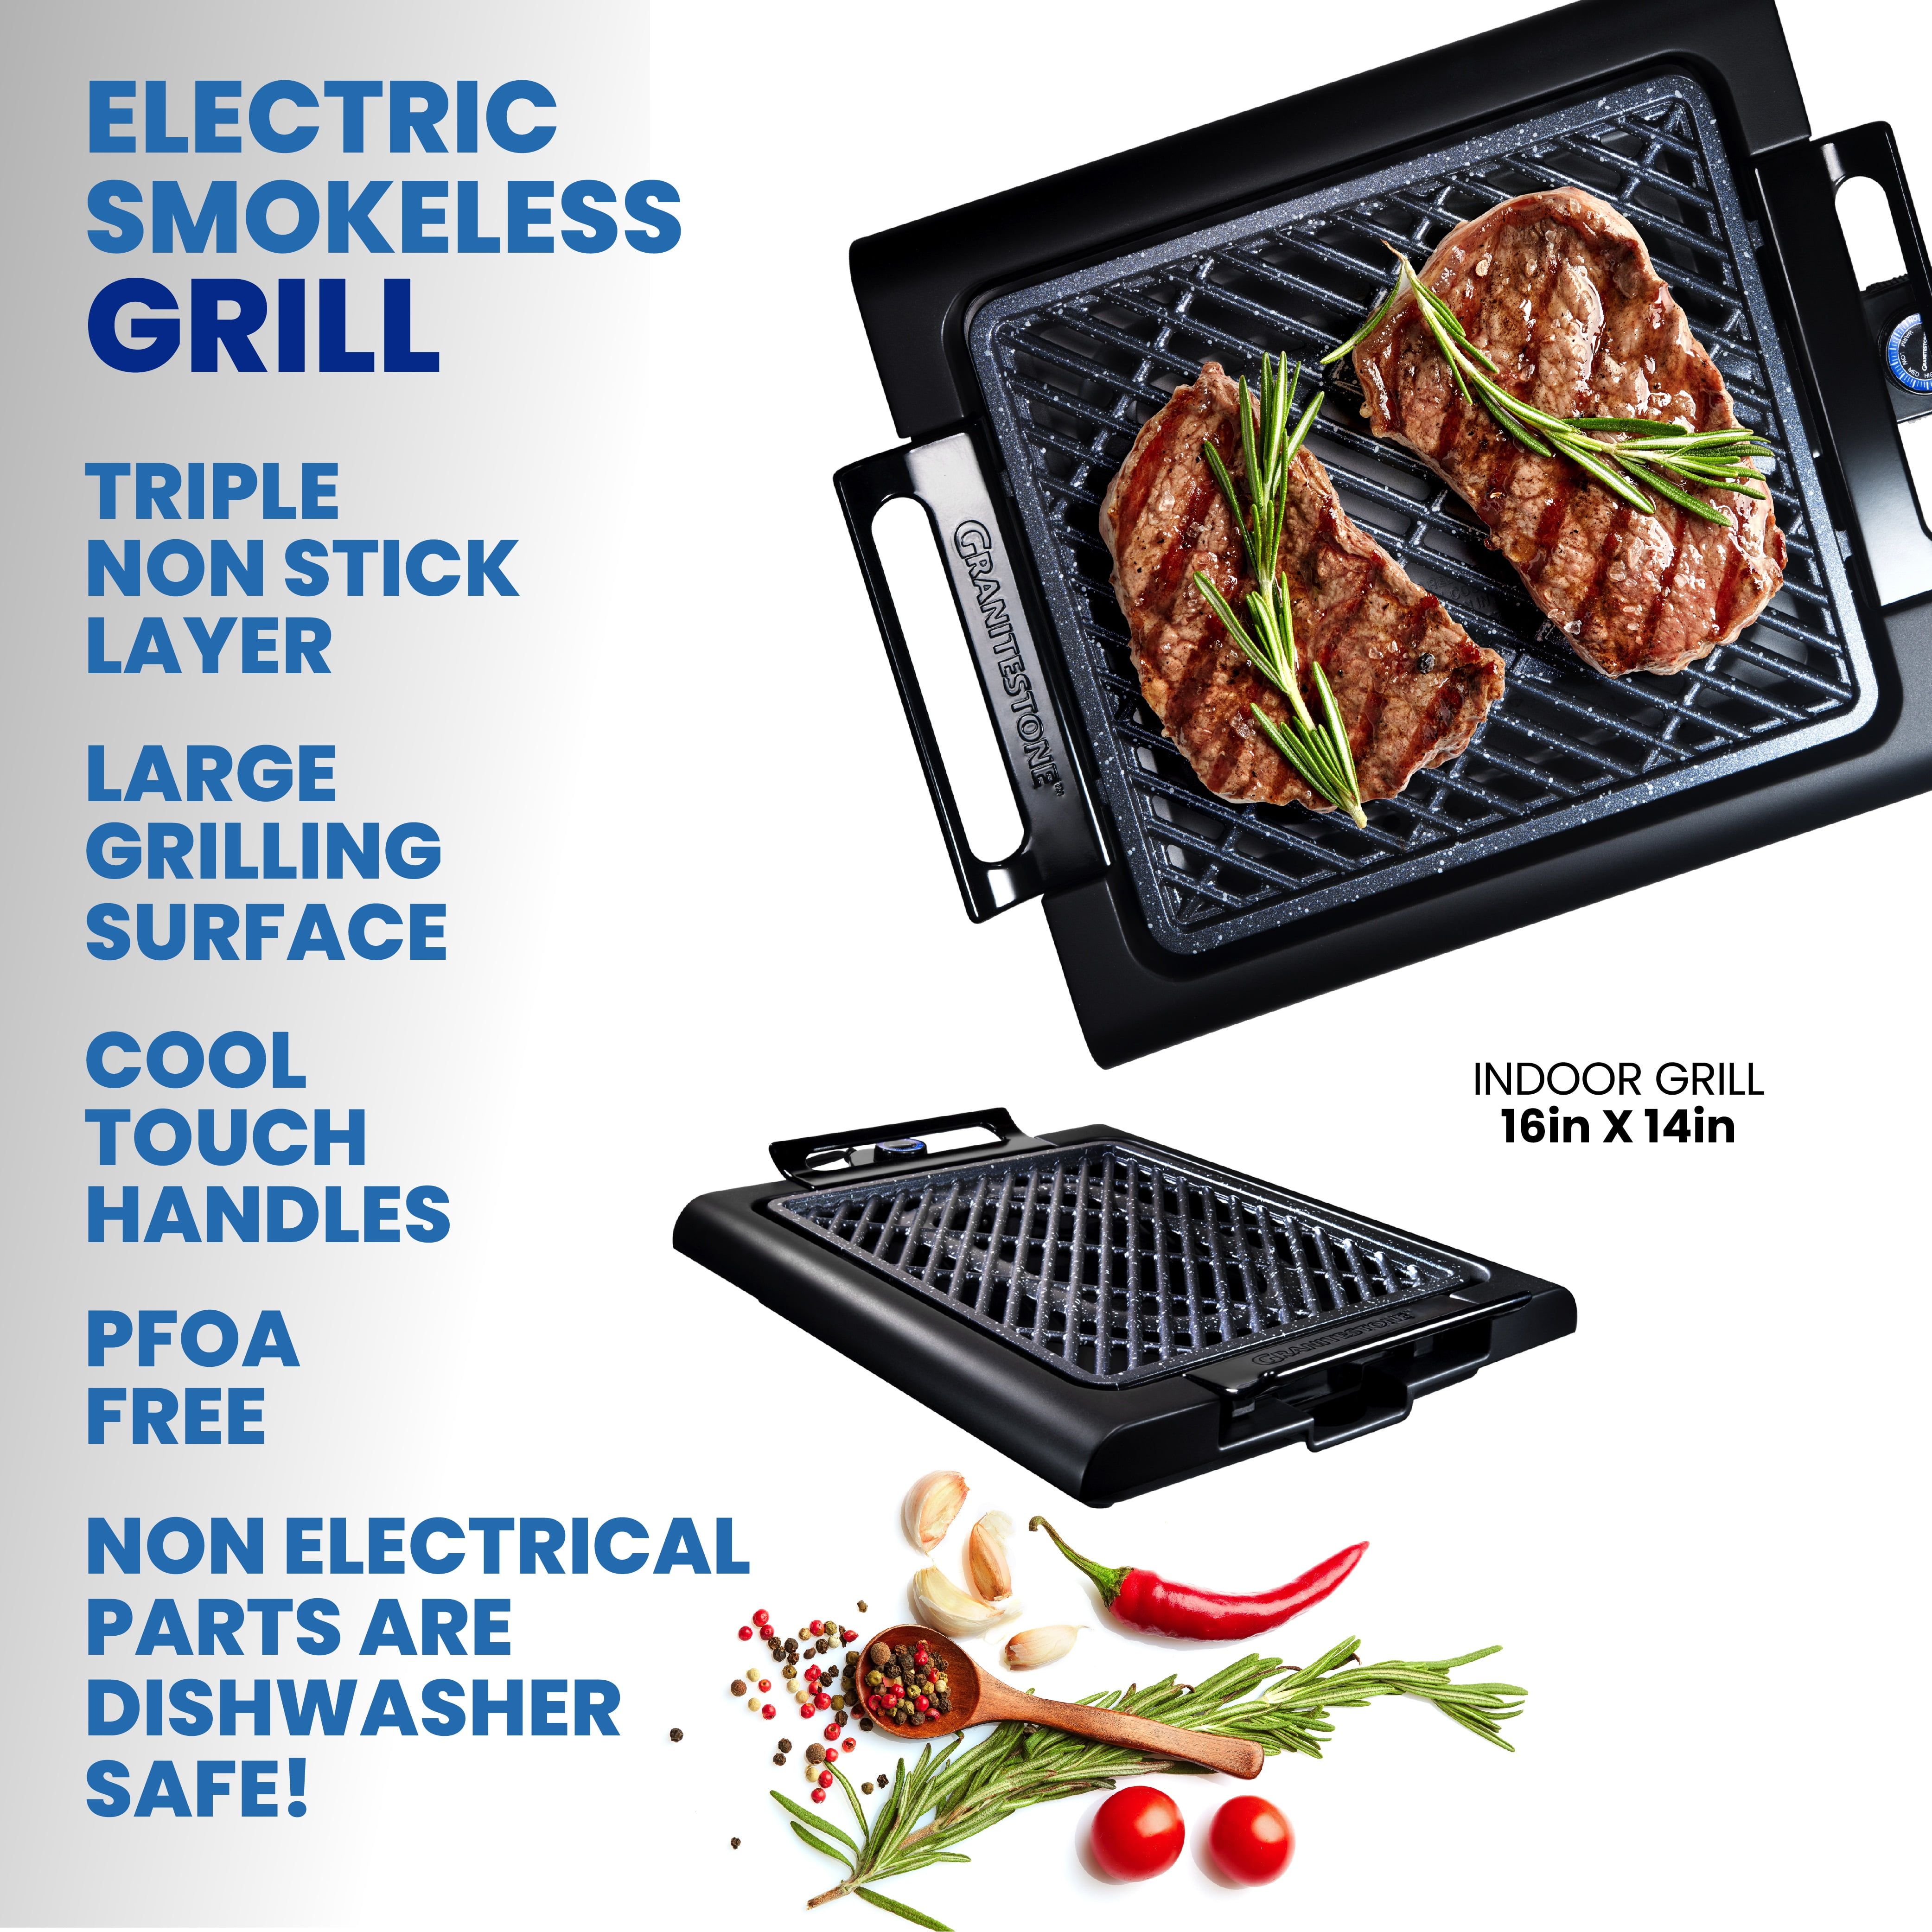 Granitestone Blue 9.8 W x 10.9 D Foldable Portable Indoor/Outdoor Use  Countertop Electric Grill